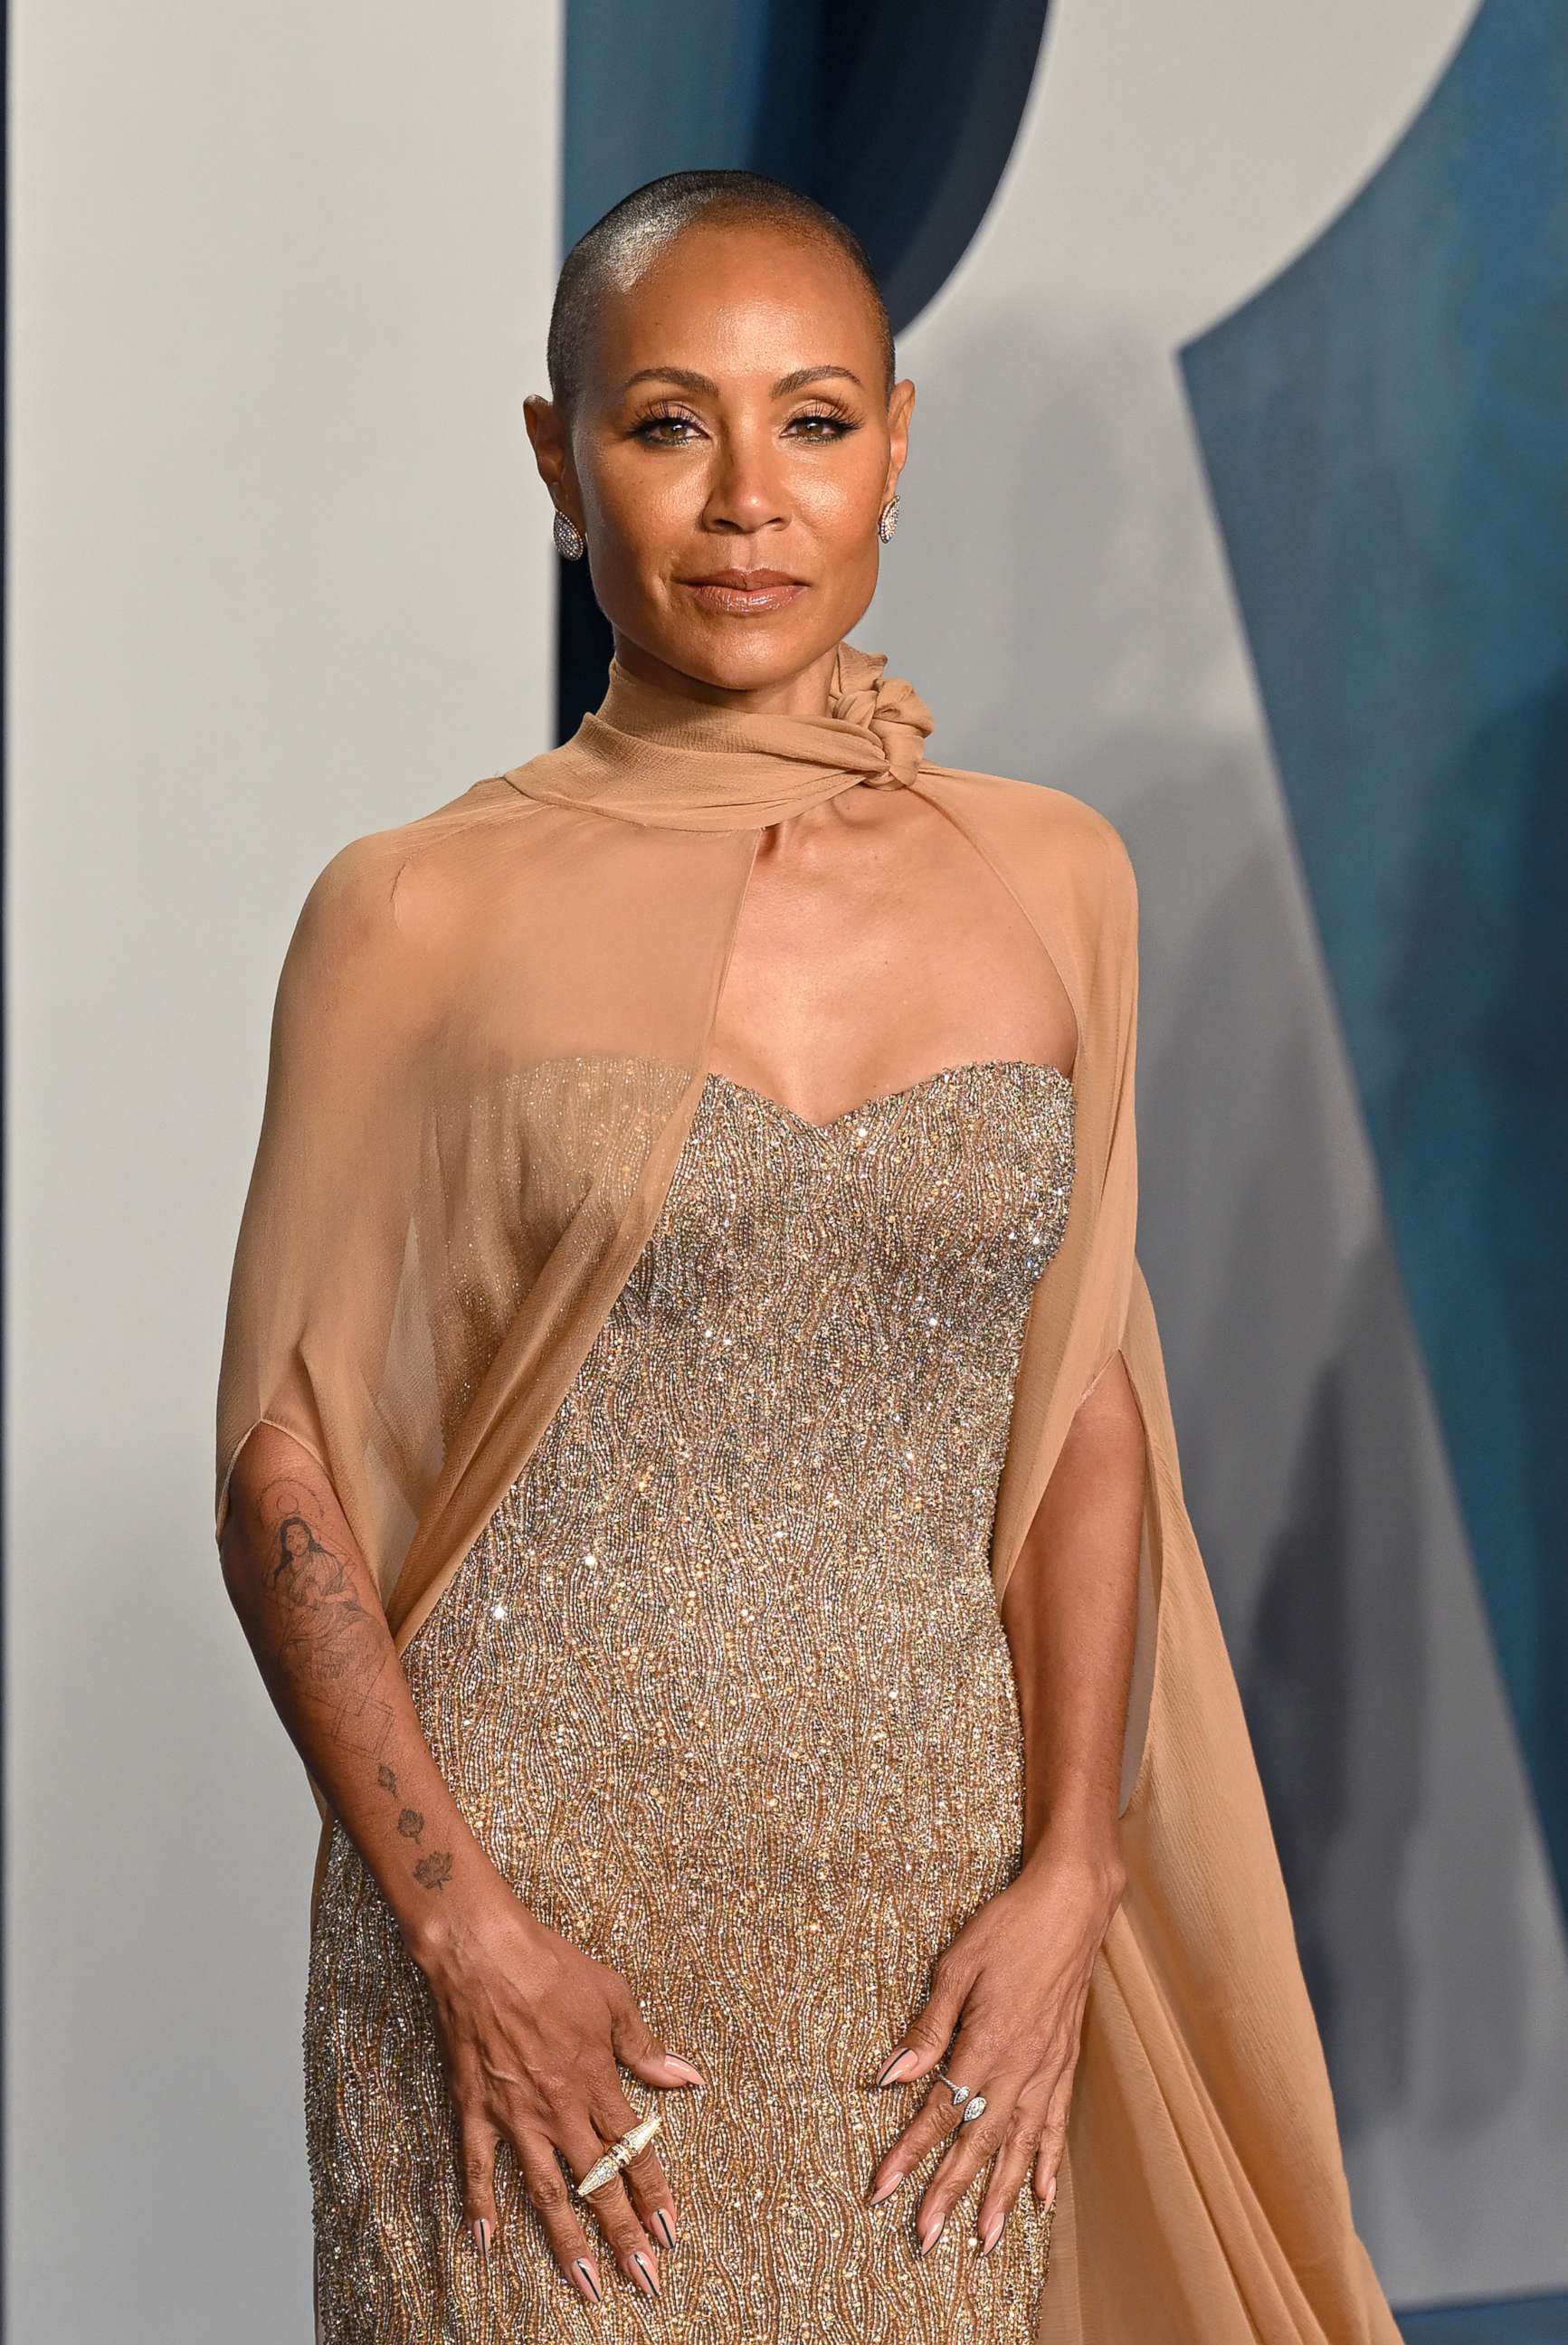 PHOTO: Jada Pinkett Smith attends the 2022 Vanity Fair Oscar Party Hosted By Radhika Jones at Wallis Annenberg Center for the Performing Arts, March 27, 2022 in Beverly Hills, Calif.